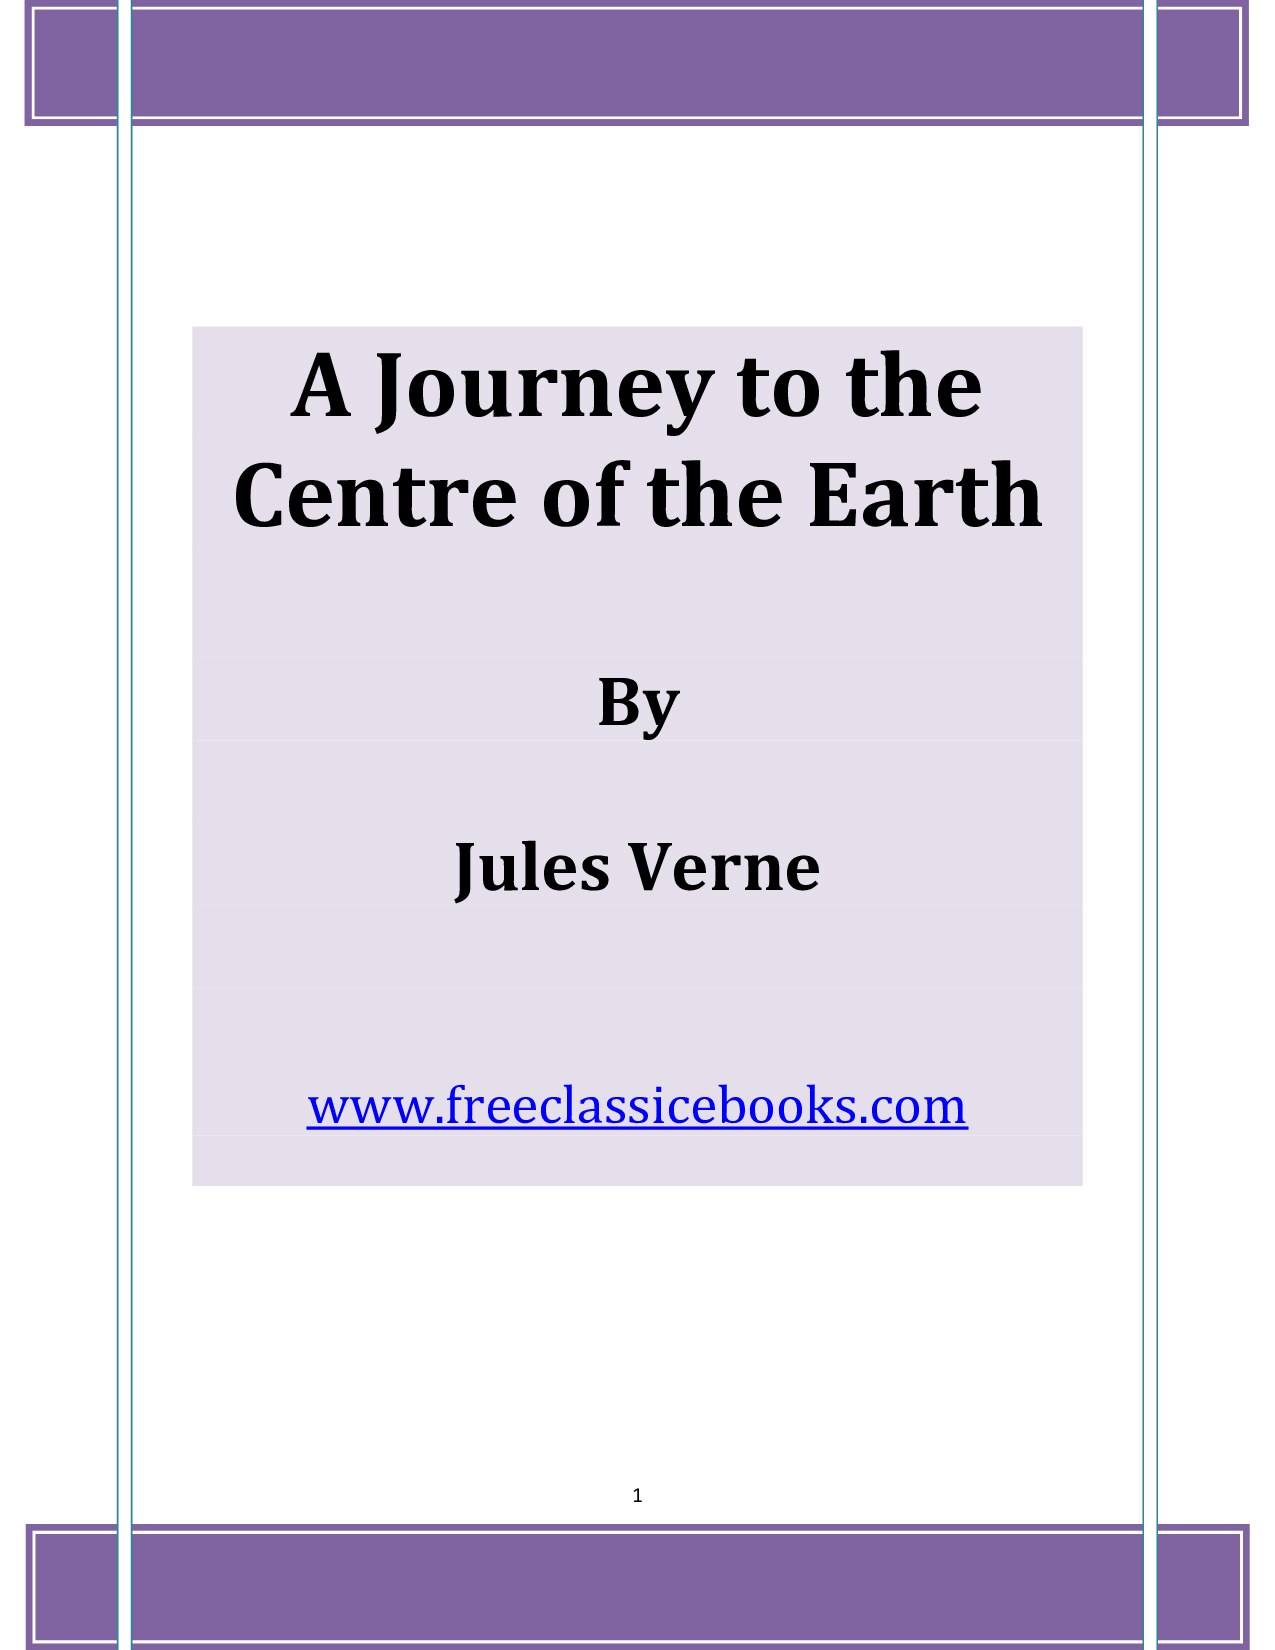 Microsoft Word - A Journey to the Centre of the Earth.doc